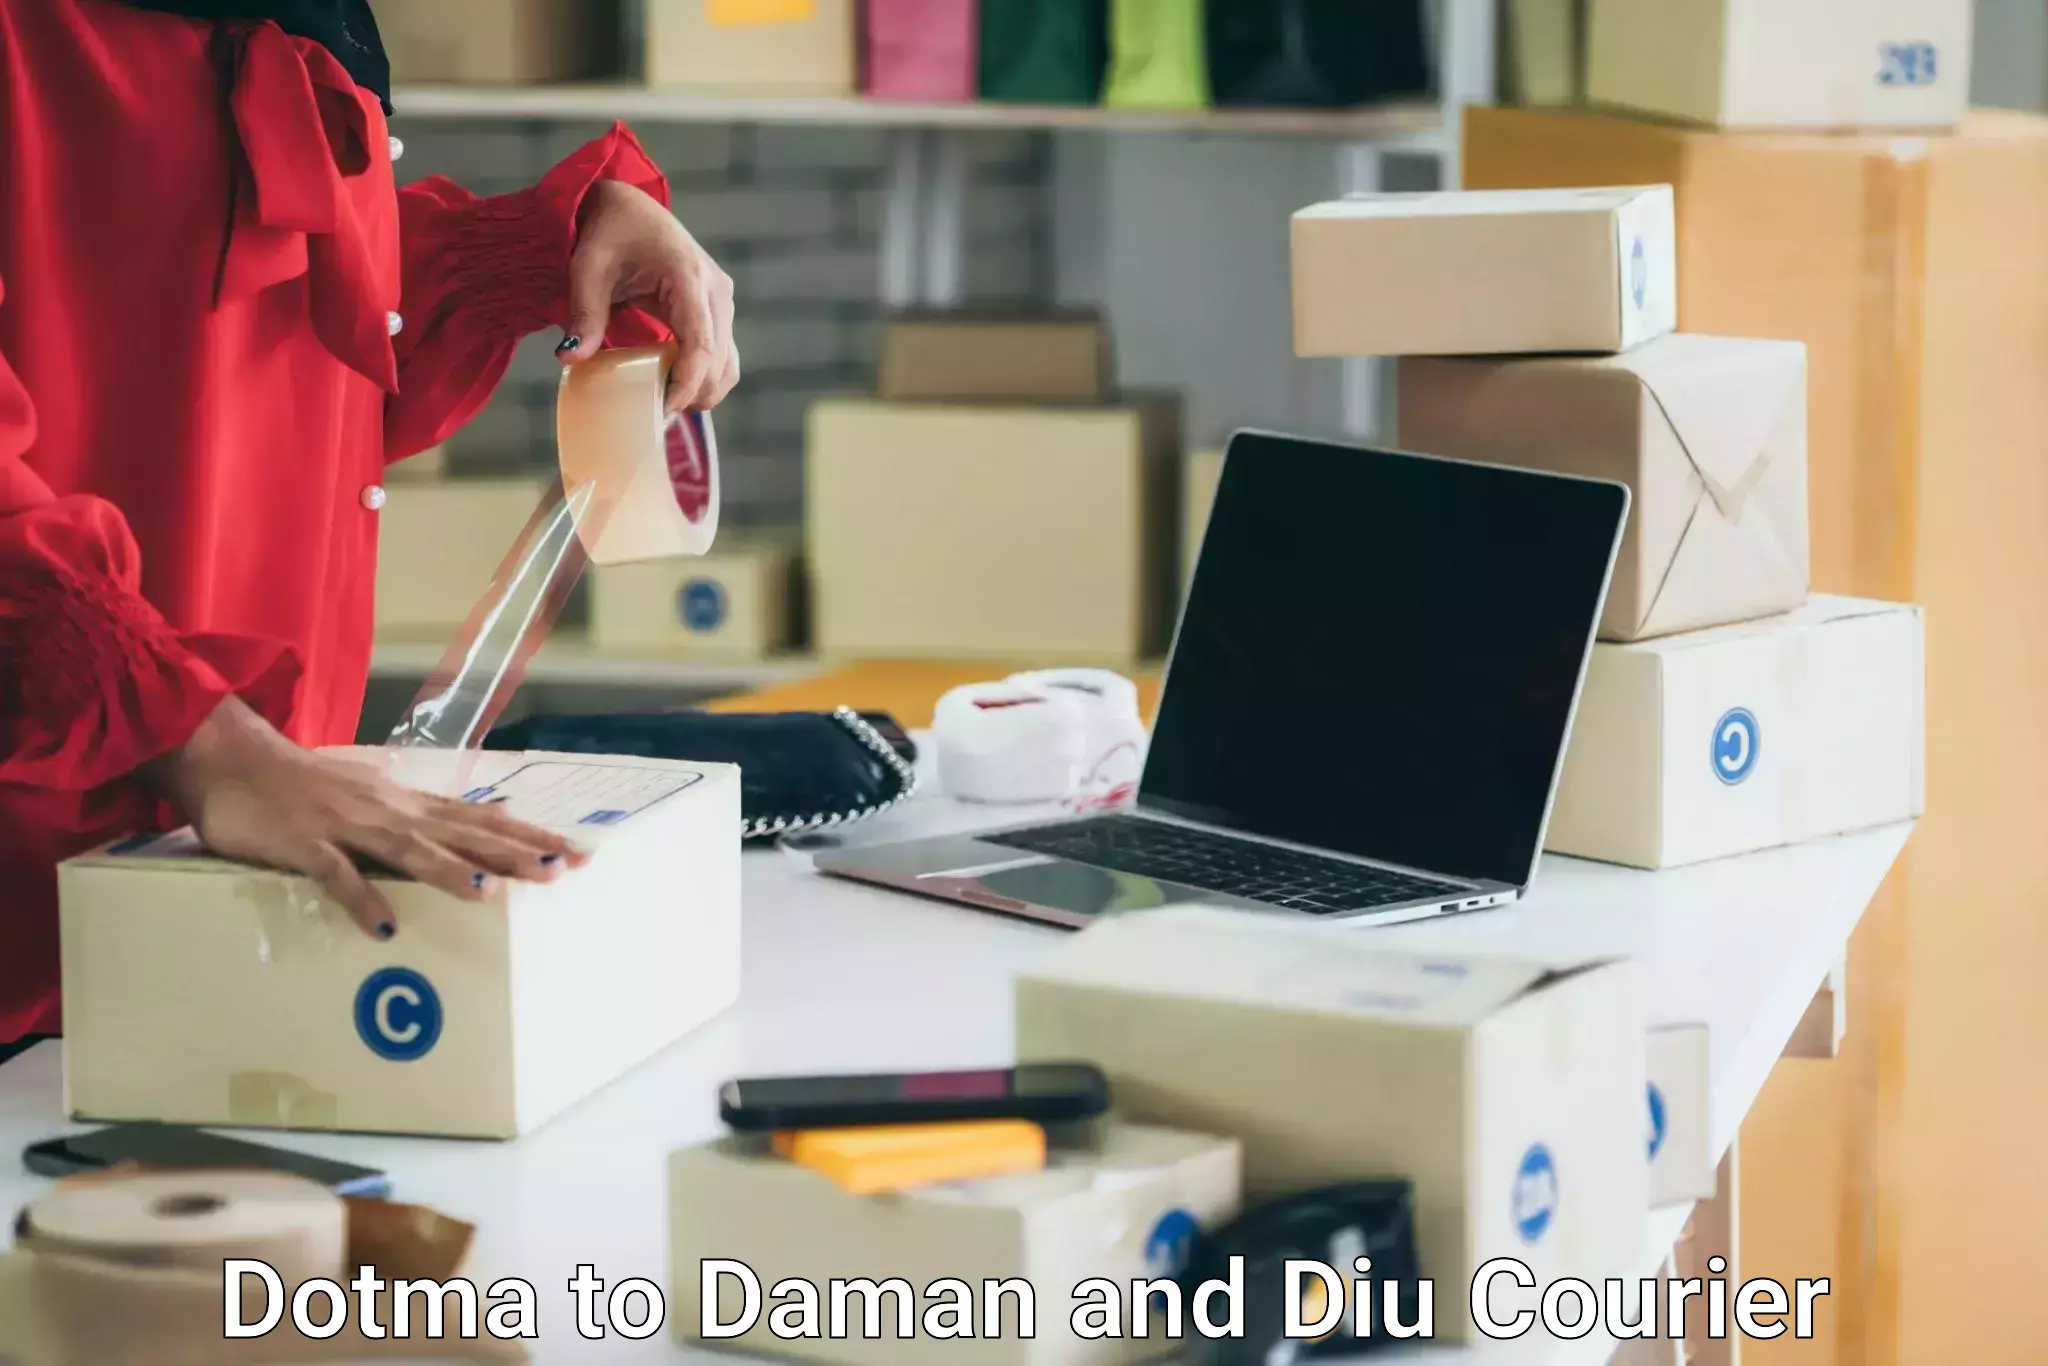 Quality relocation services Dotma to Daman